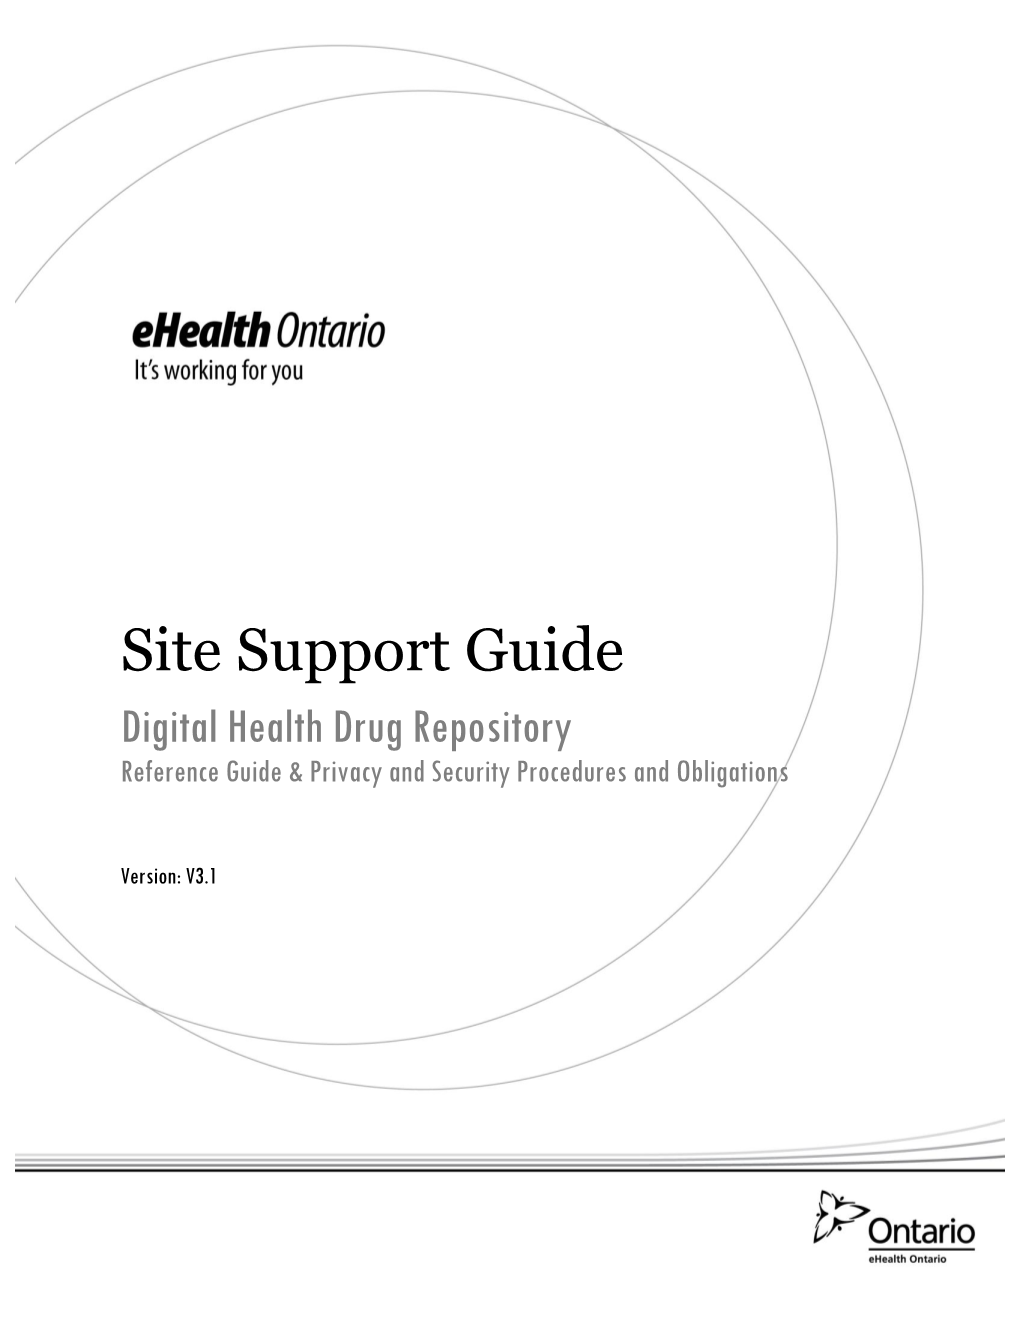 Site Support Guide Digital Health Drug Repository Reference Guide & Privacy and Security Procedures and Obligations